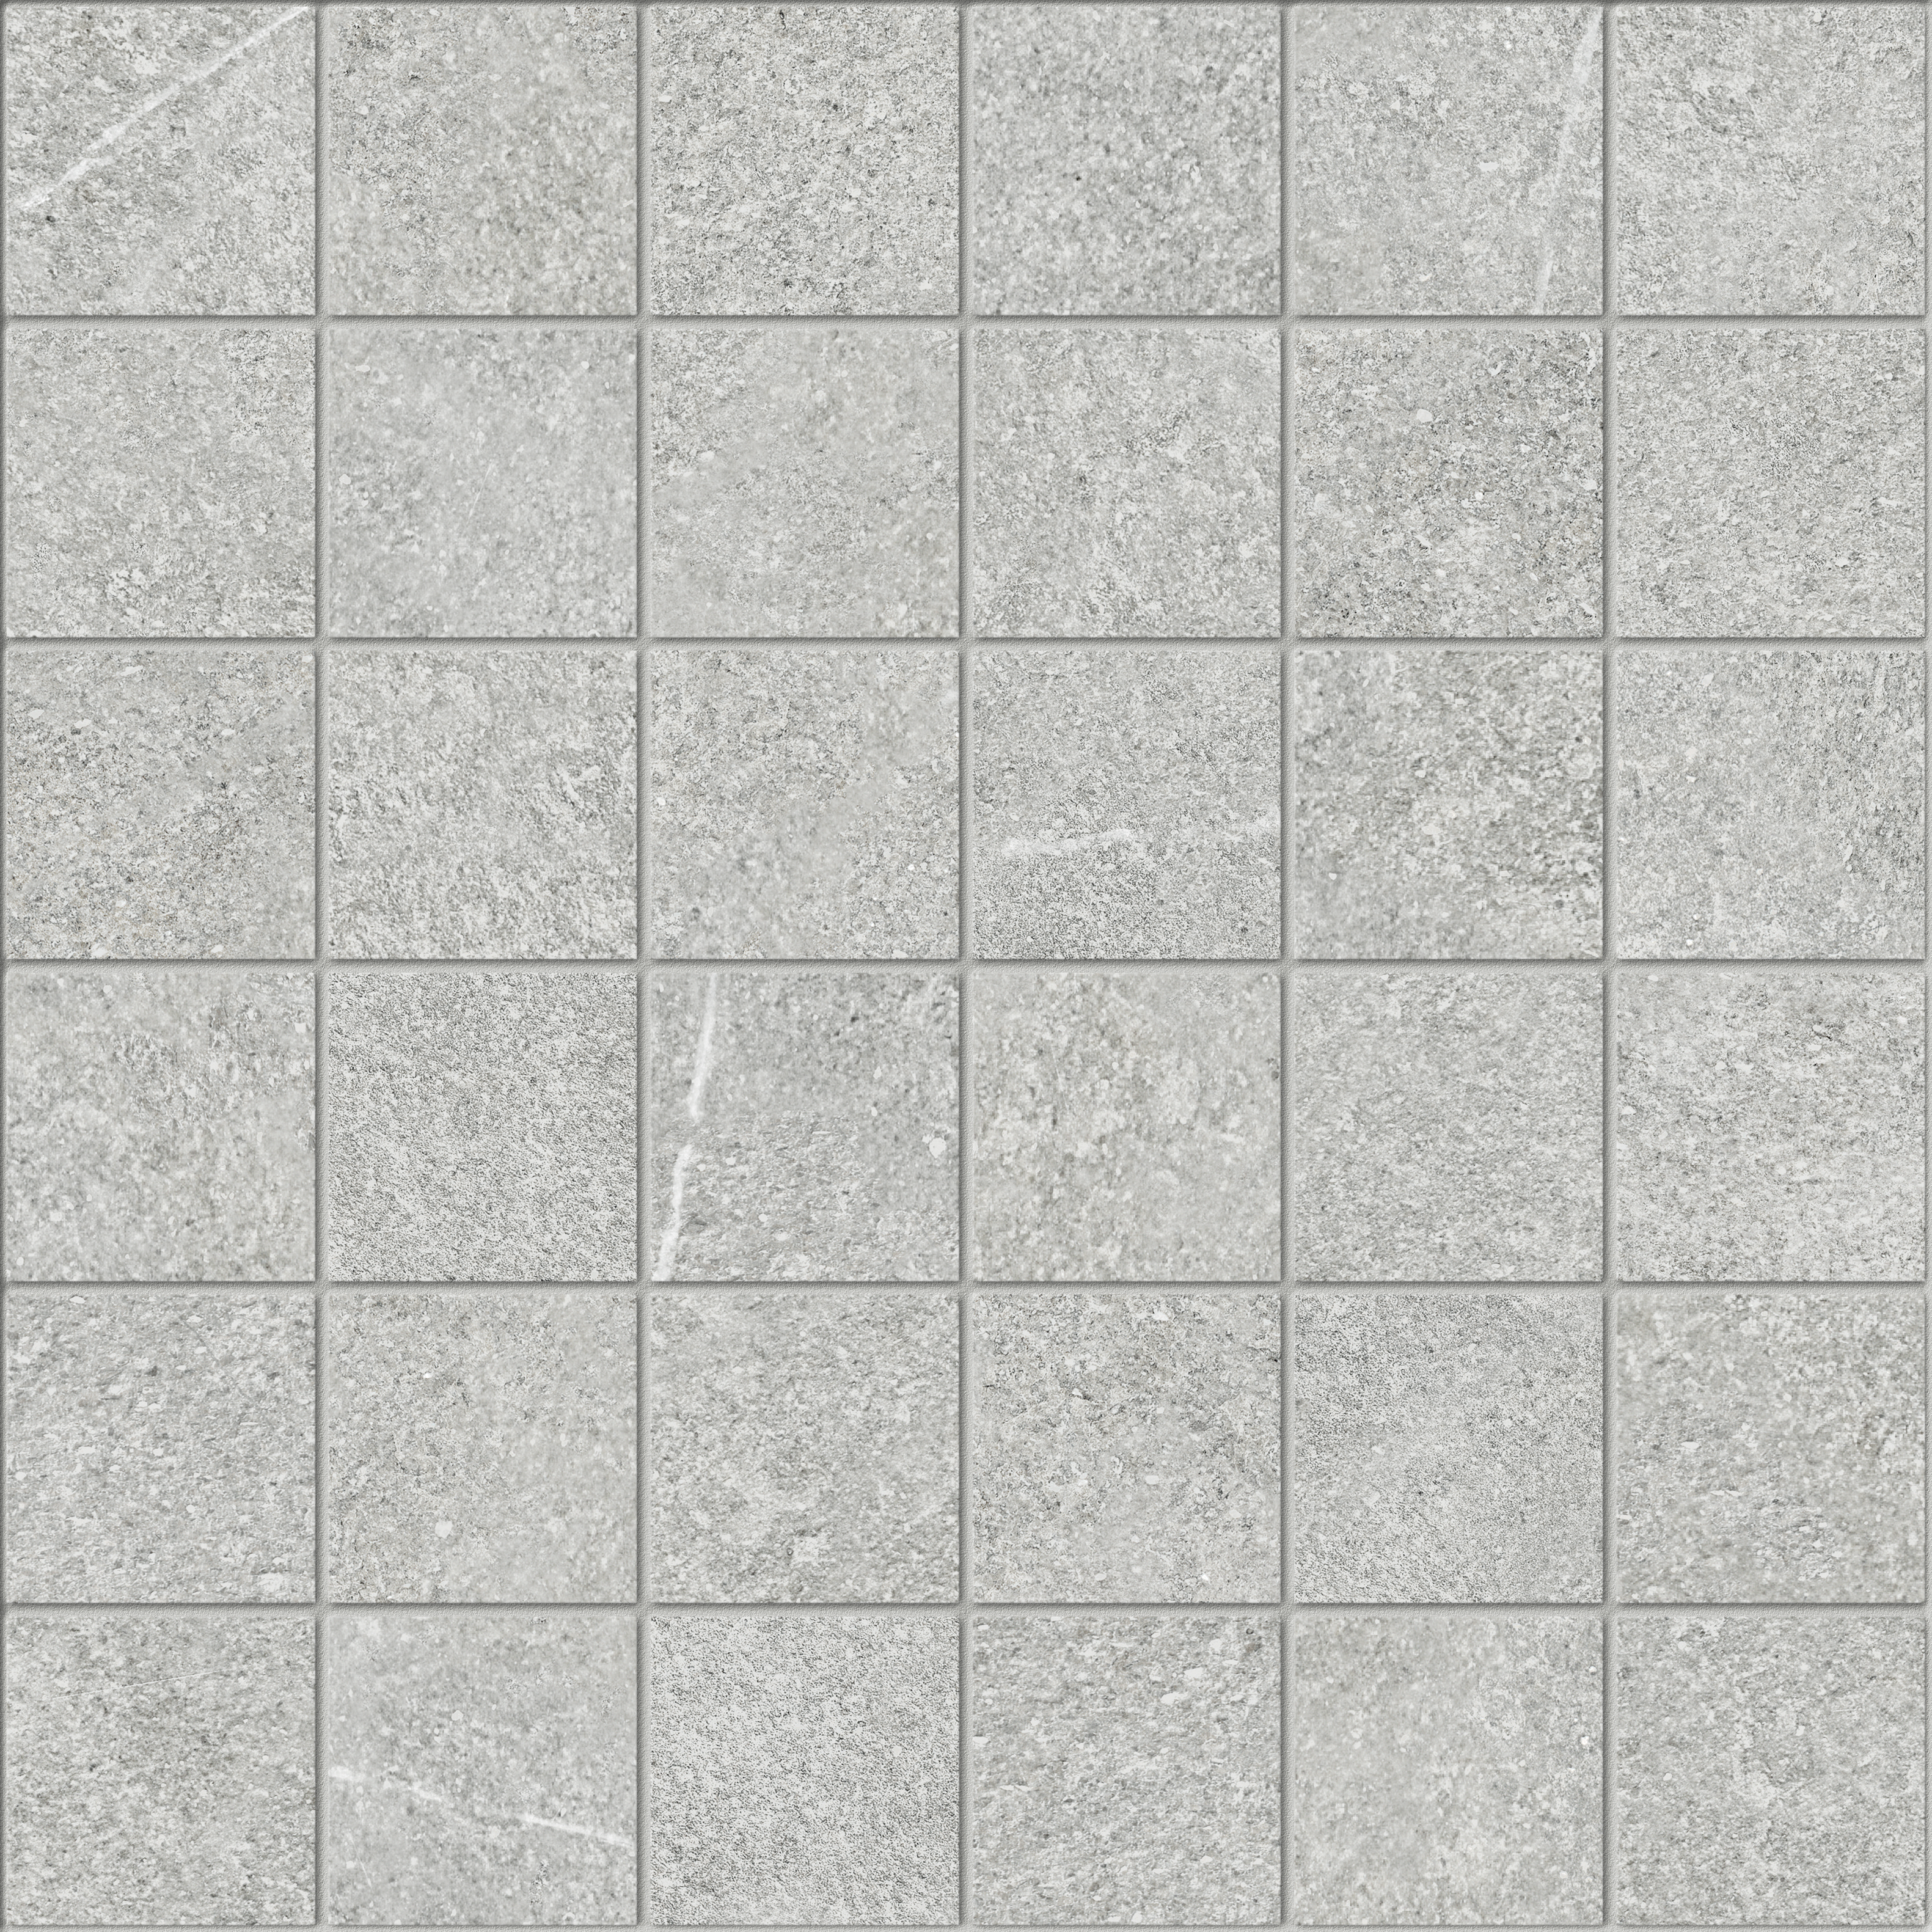 ash straight stack 2x2-inch pattern color body porcelain mosaic from mjork anatolia collection distributed by surface group international matte finish straight edge edge mesh shape